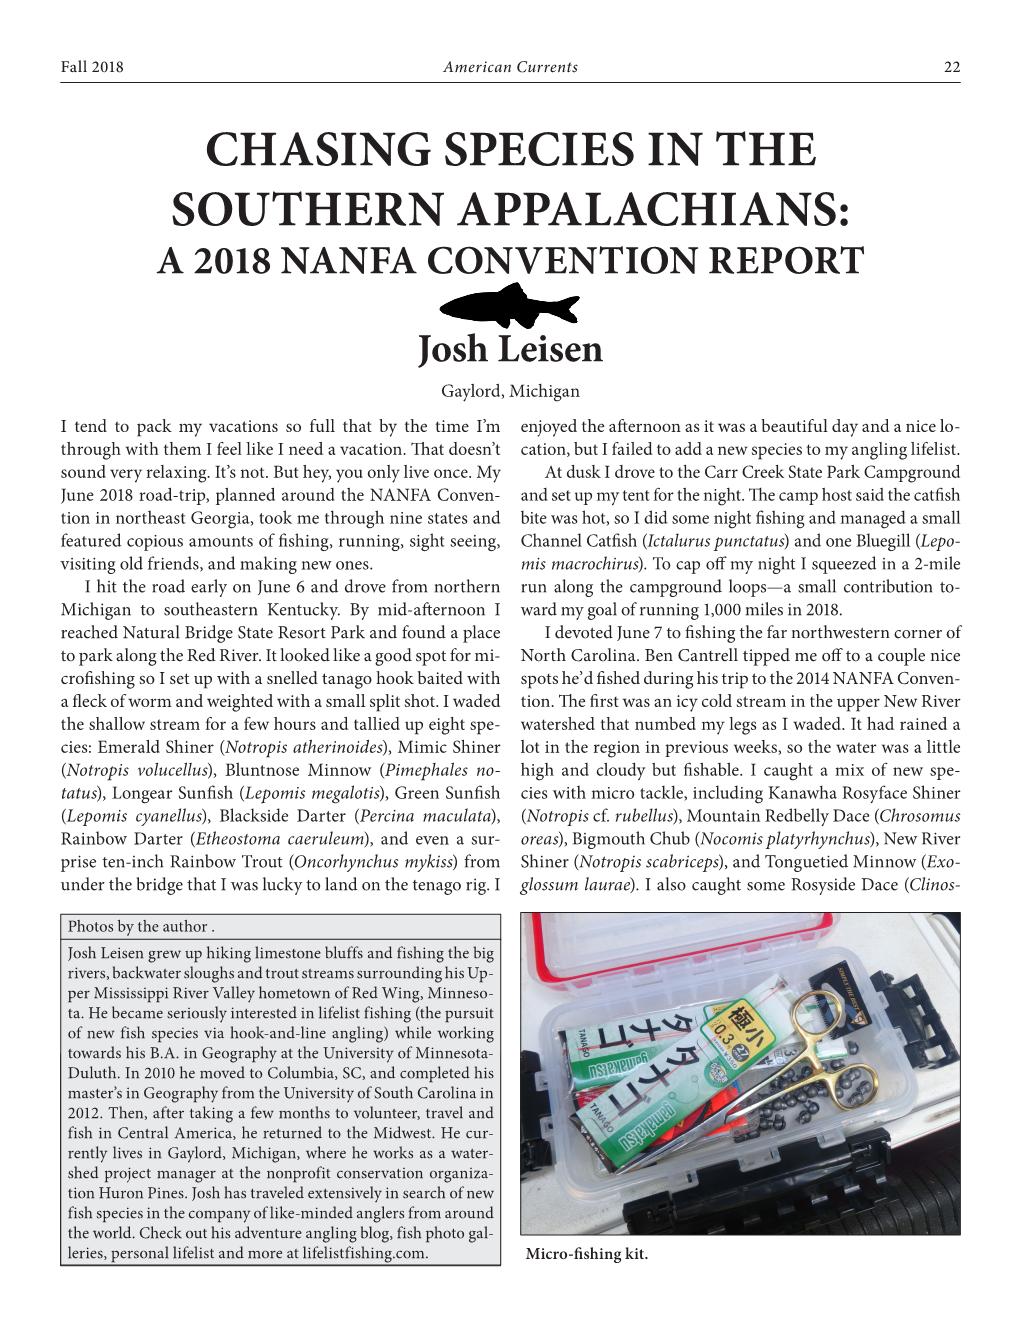 Chasing Species in the Southern Appalachians: a 2018 NANFA Convention Report Josh Leisen